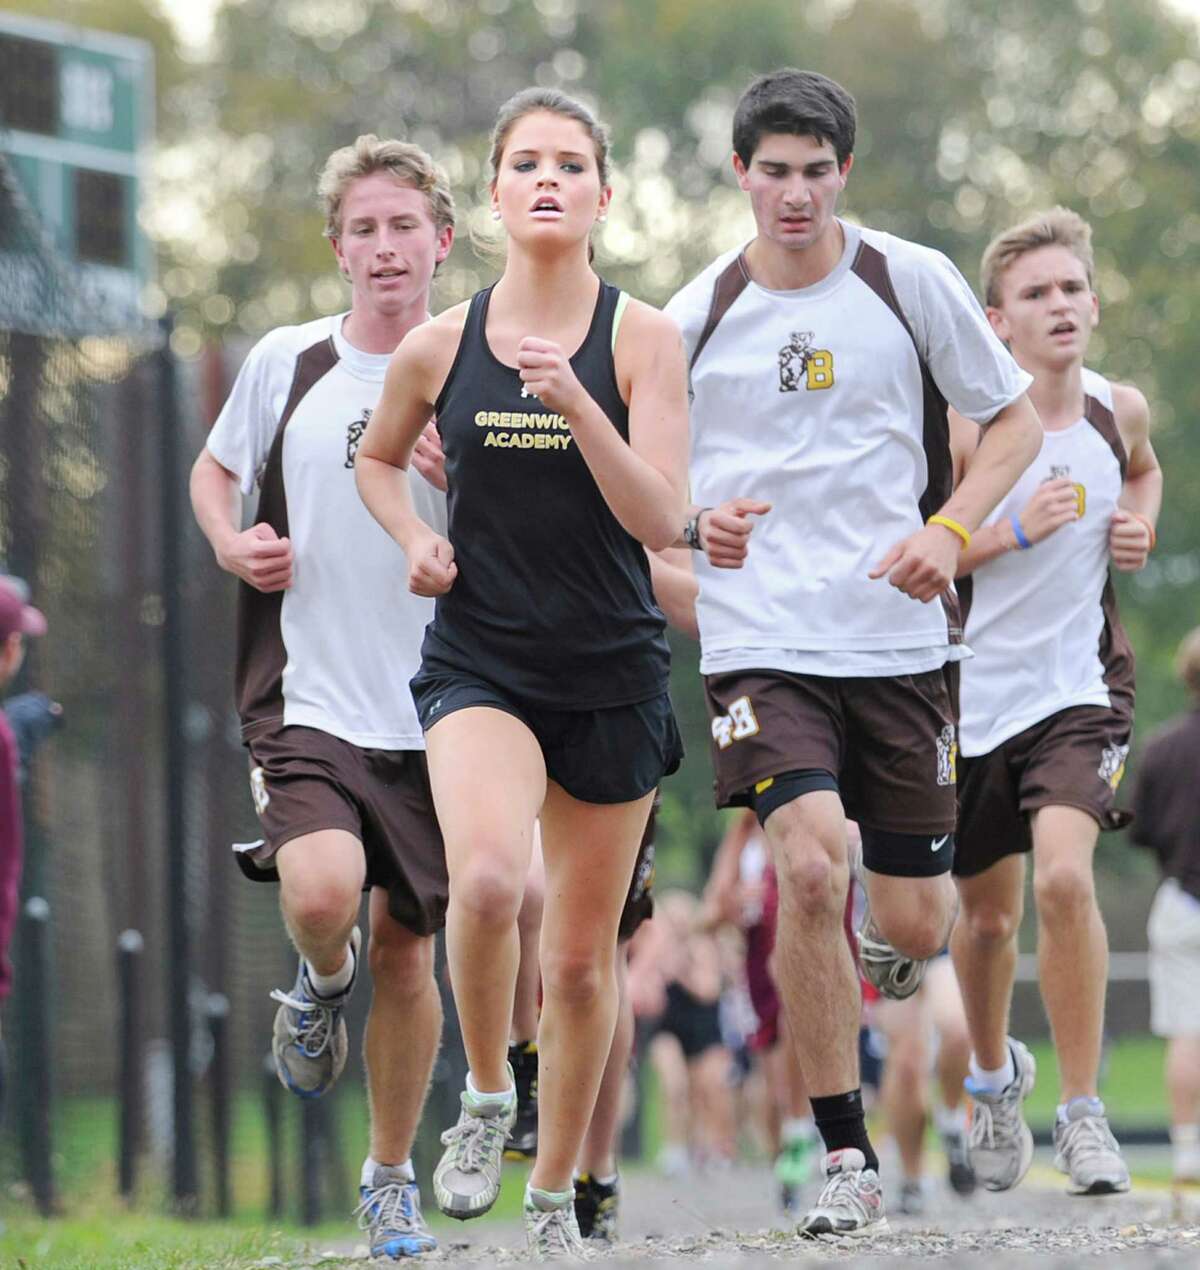 Greenwich Academy cross country coaches Jane Finch and Jon Coffin are expecting big things this year from returning runner Annie Duff.